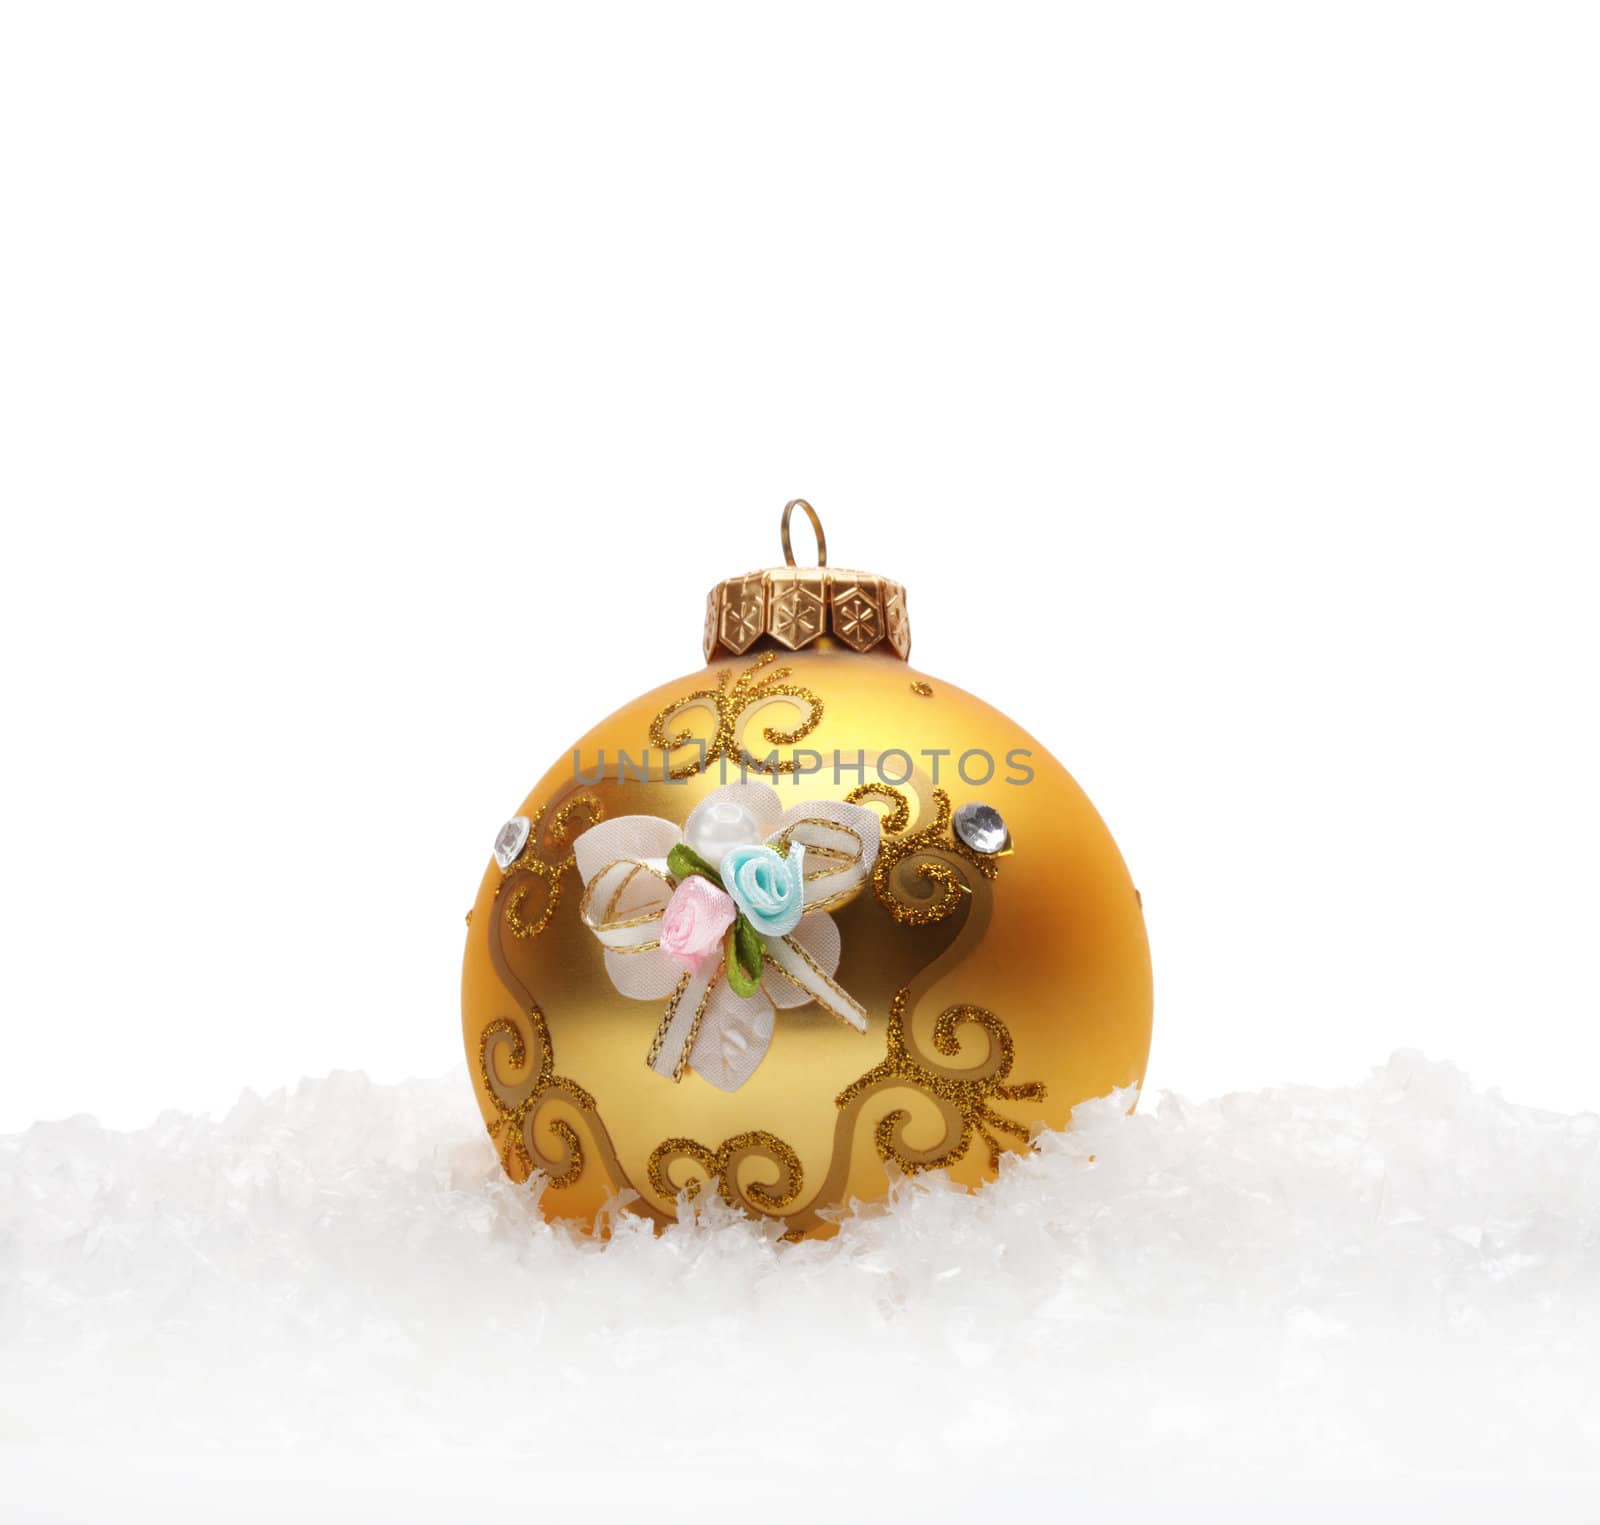 Gold Christmas balls in snow by rudchenko